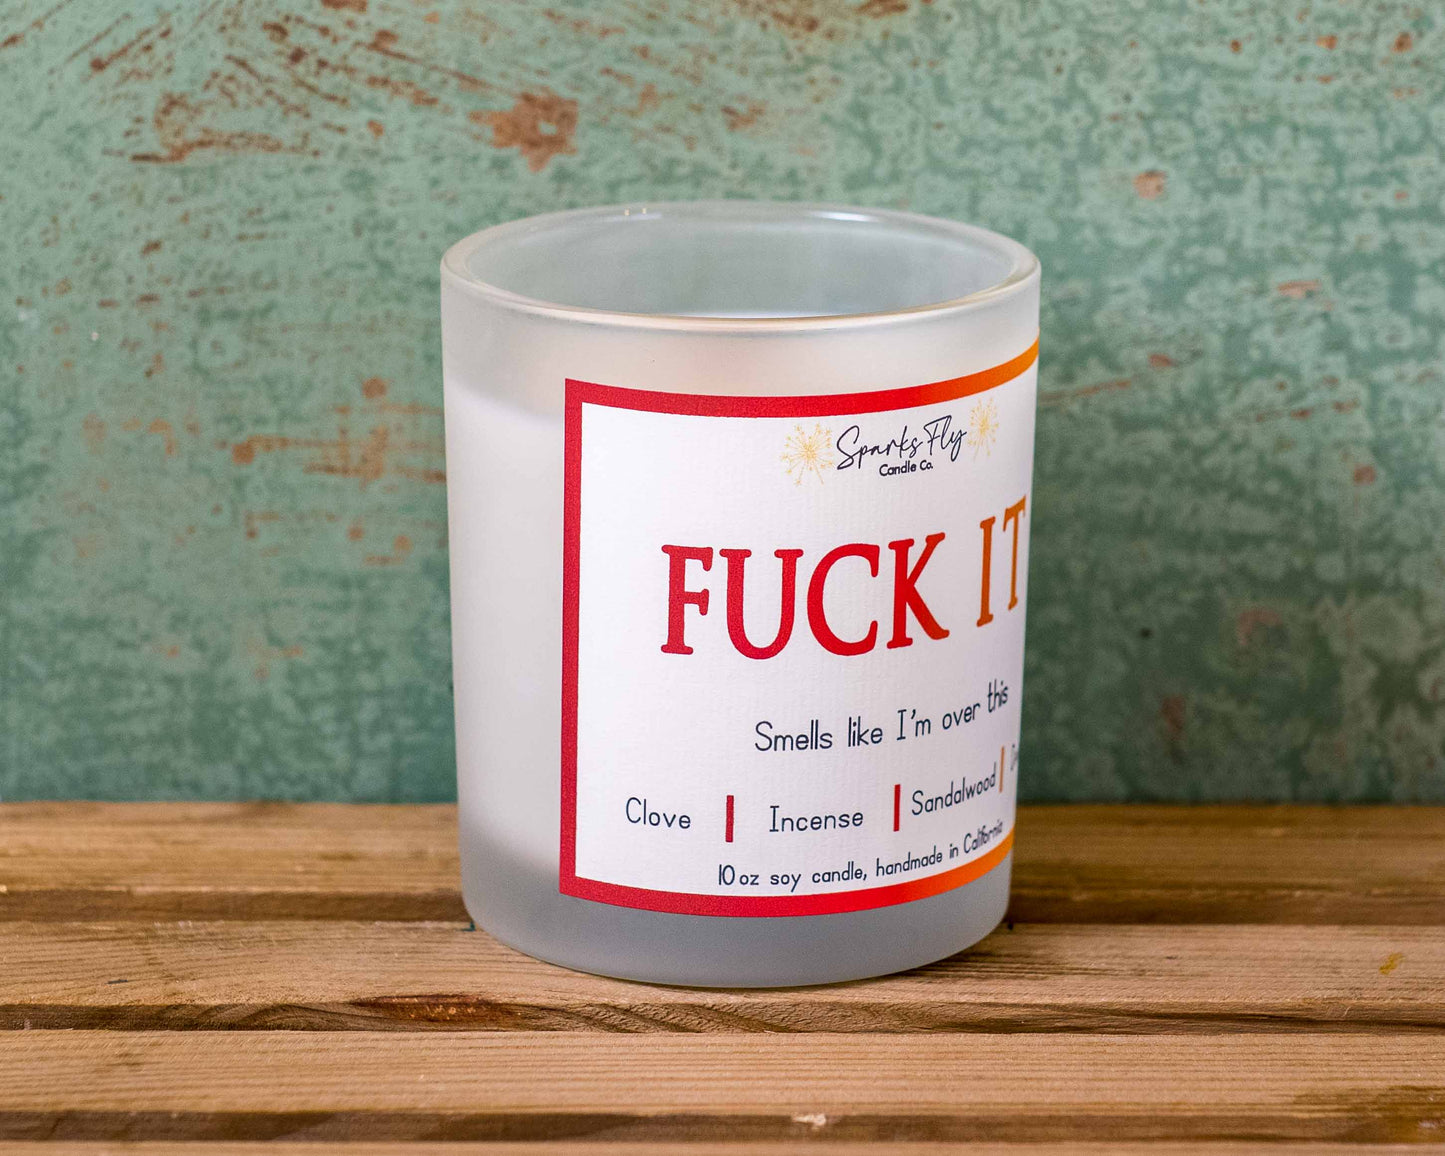 Fuck It Candle - Expressive aroma for those 'I'm done' moments.